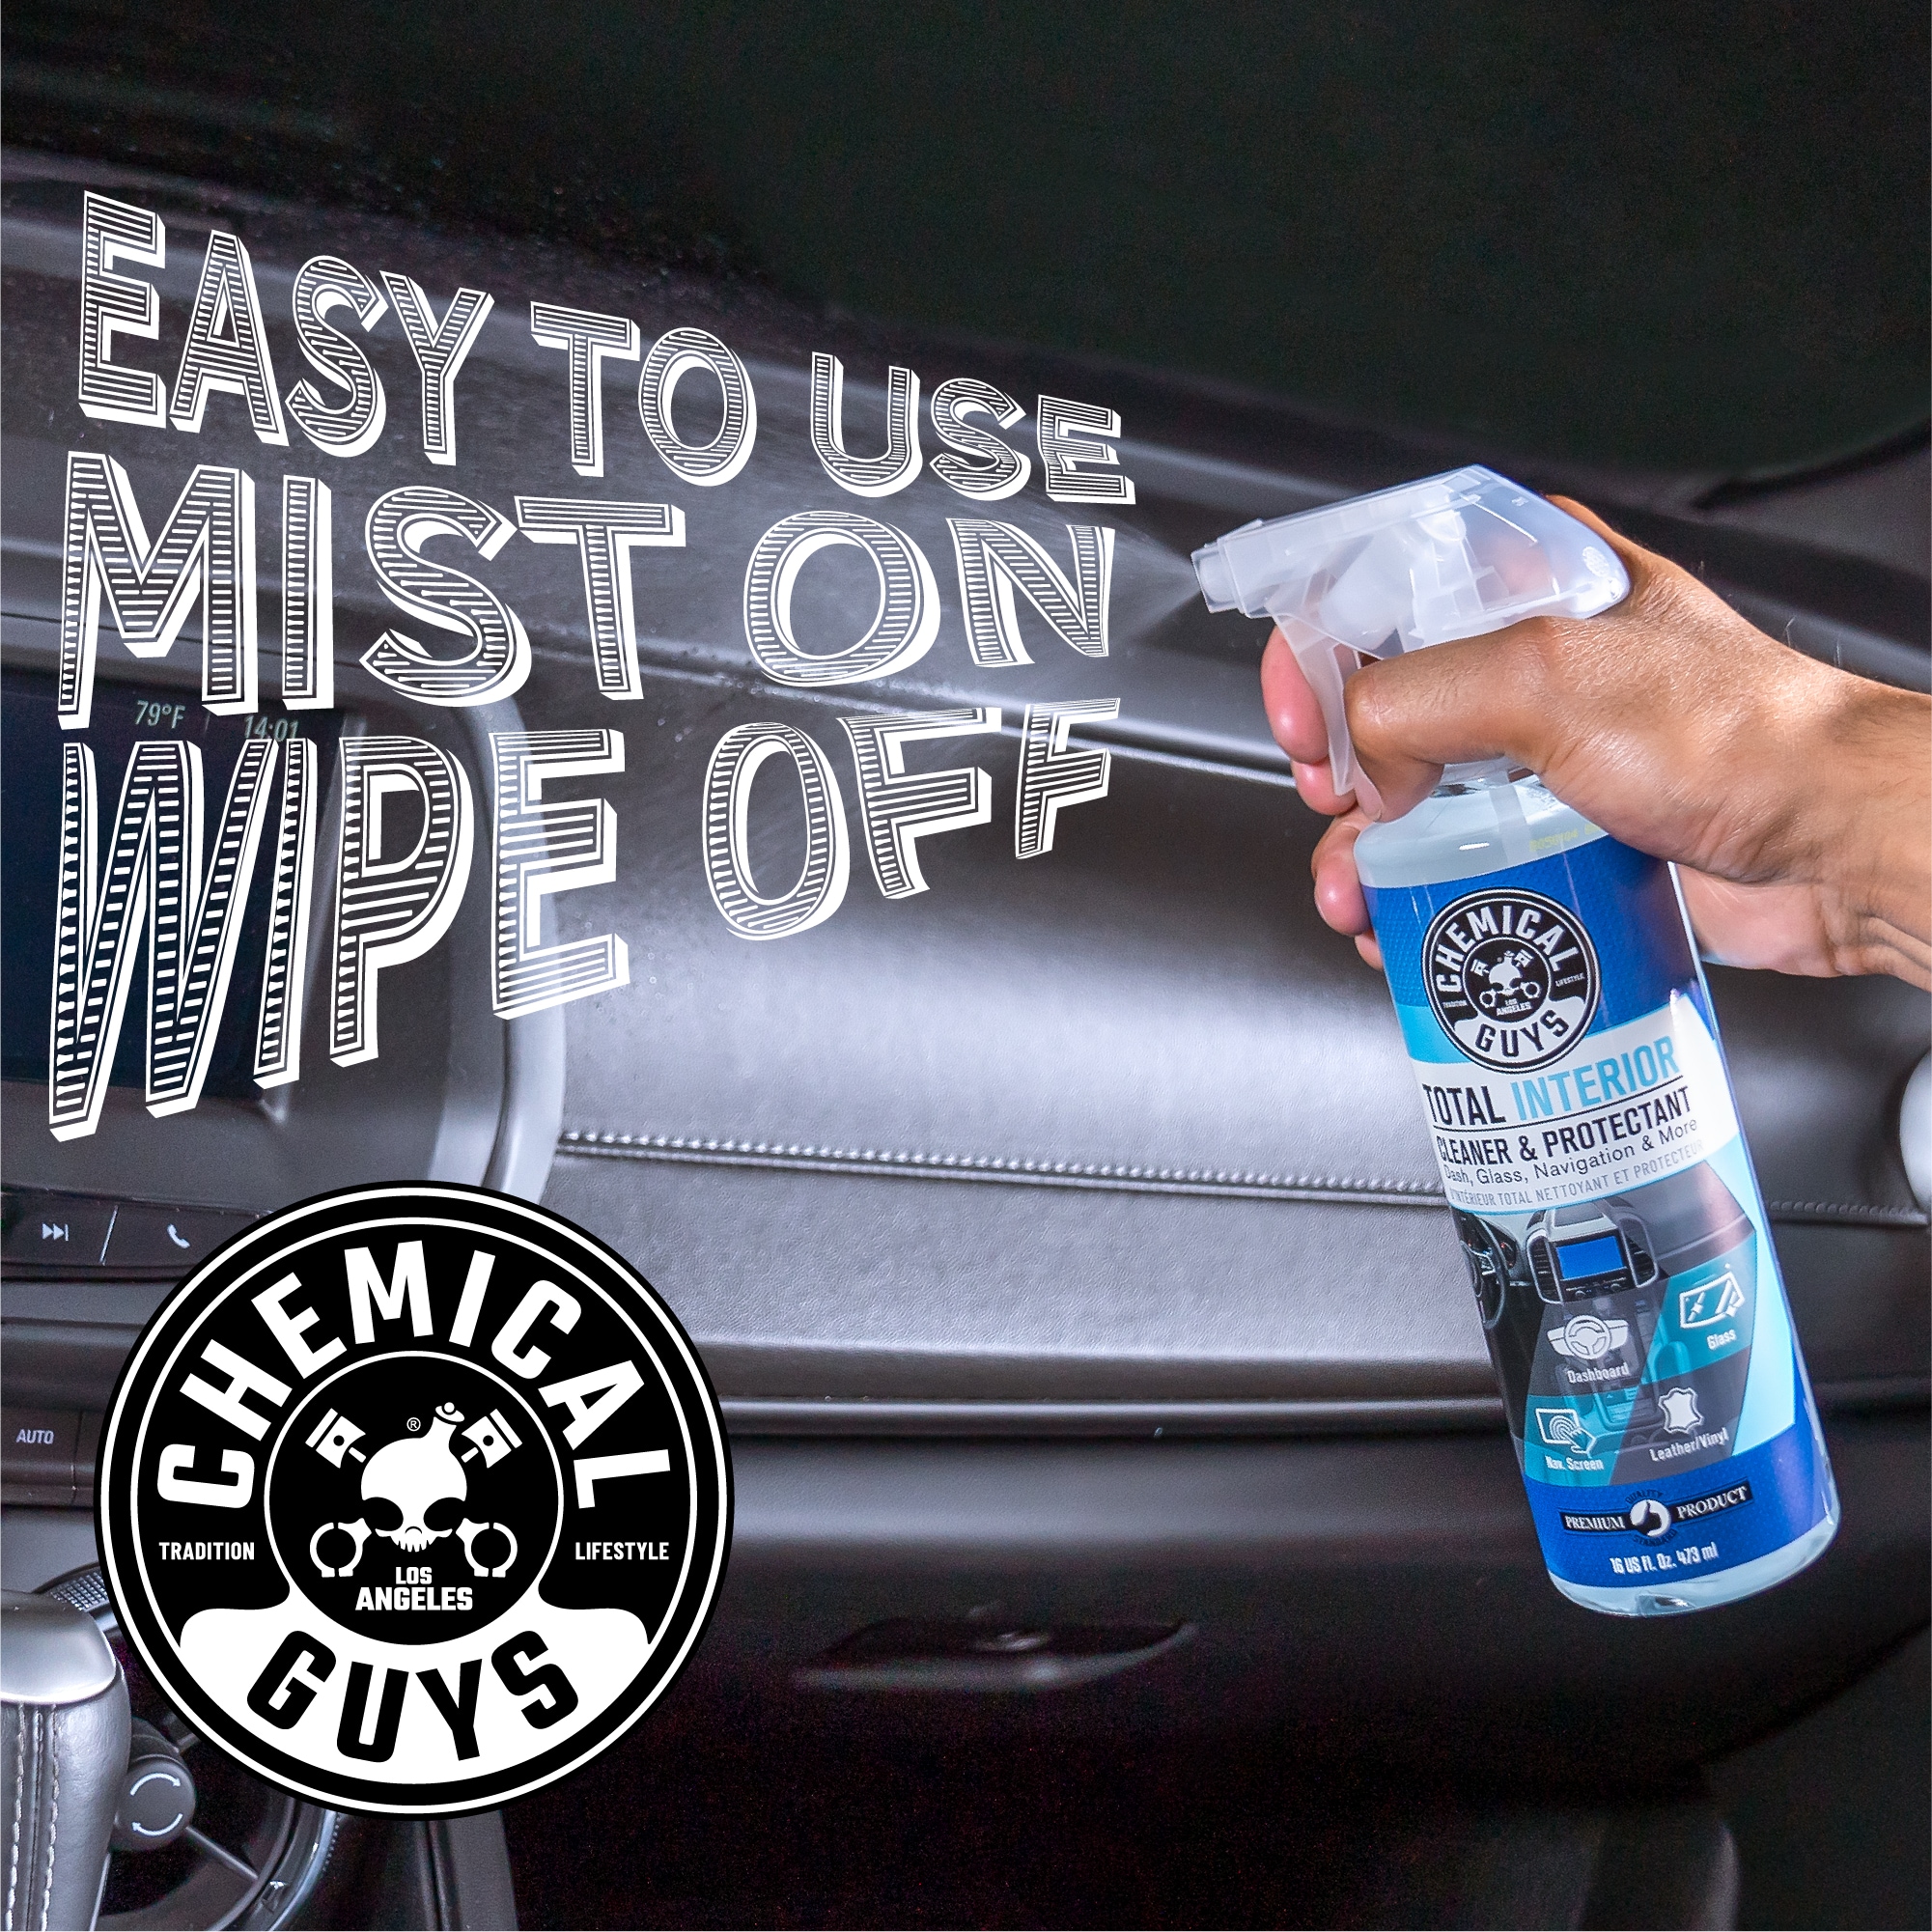 Chemical Guys SPI 663 InnerClean Interior Quick Detailer and Protectant 1  Gal for sale online